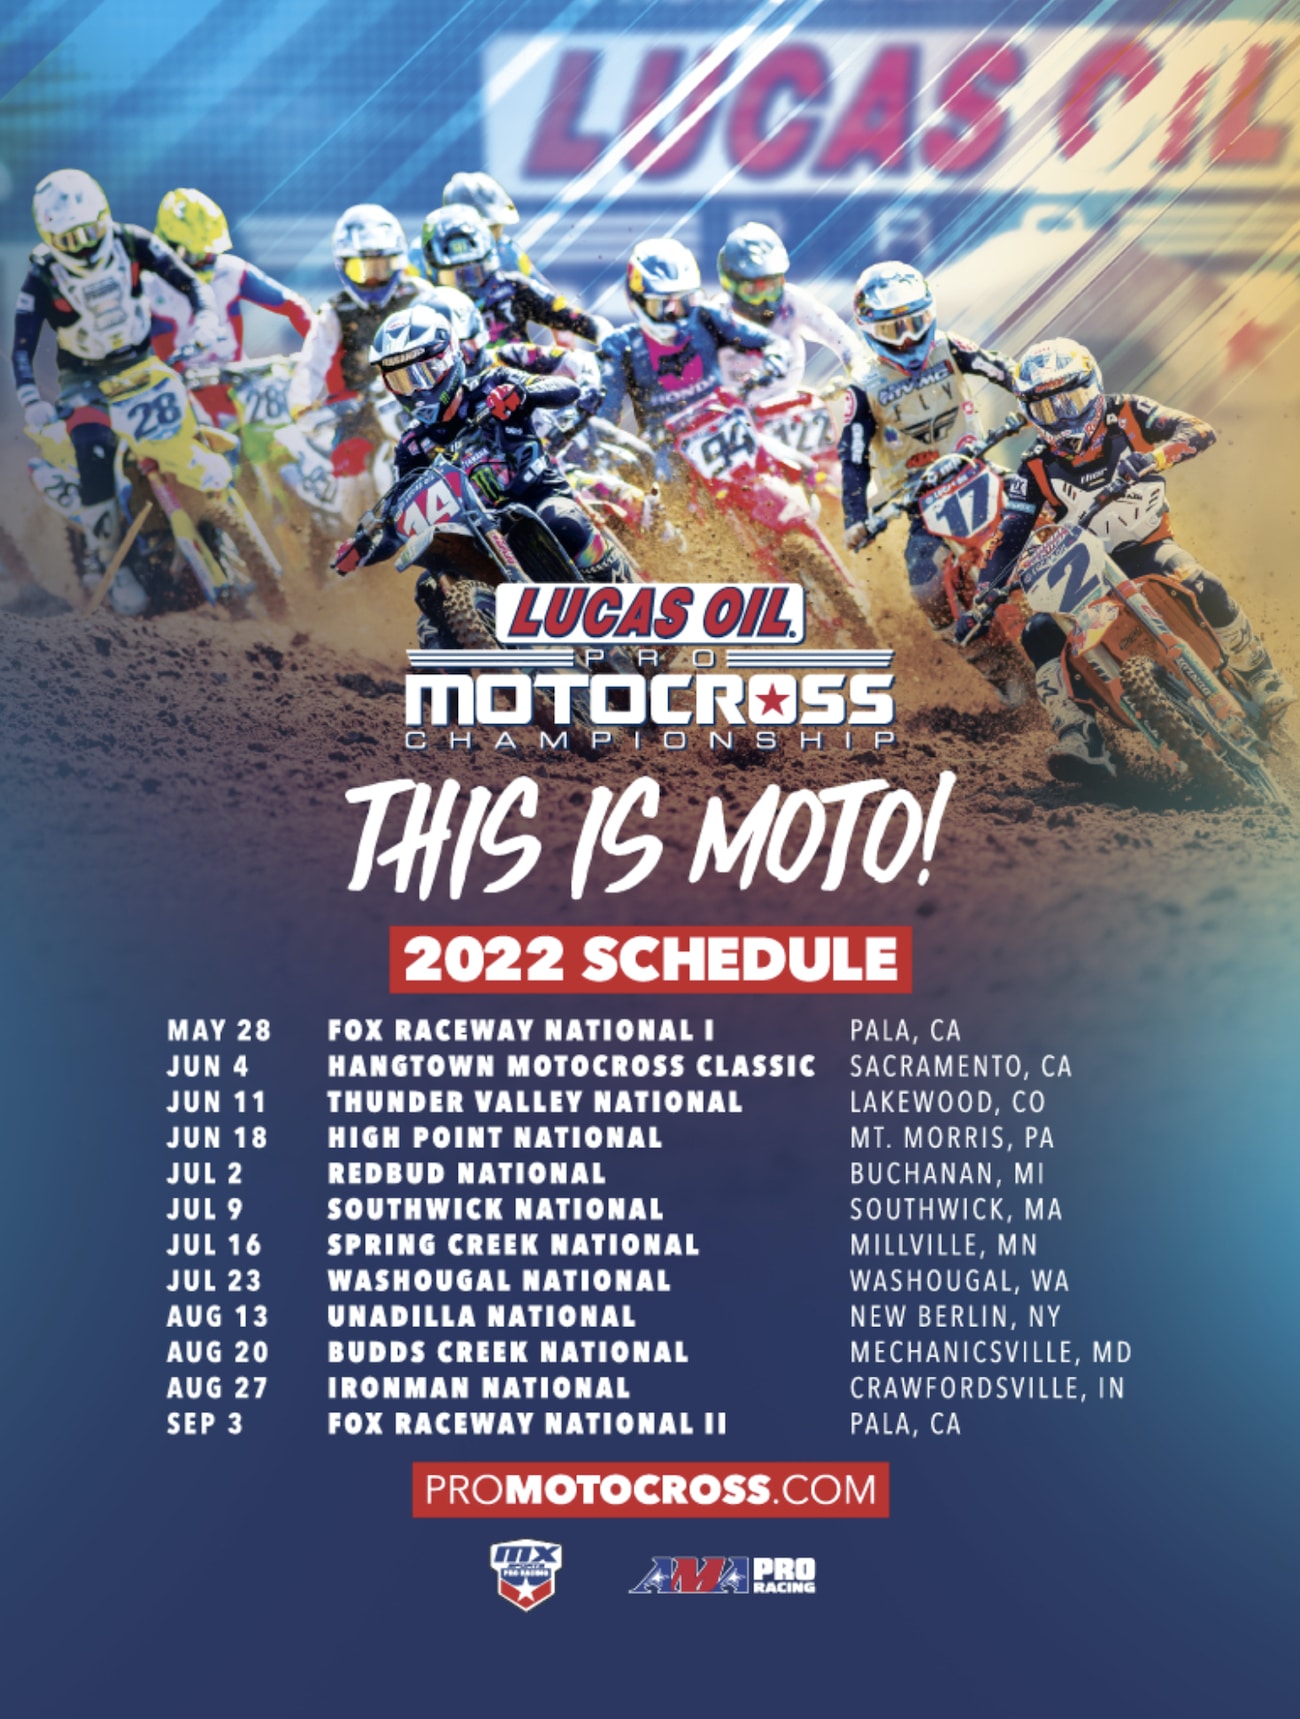 Motocross Schedule 2022 2022 Ama Pro Motocross Schedule: Starts At Pala On May 28, 2022 & Ends At  Pala On Sept. 3 - Motocross Action Magazine